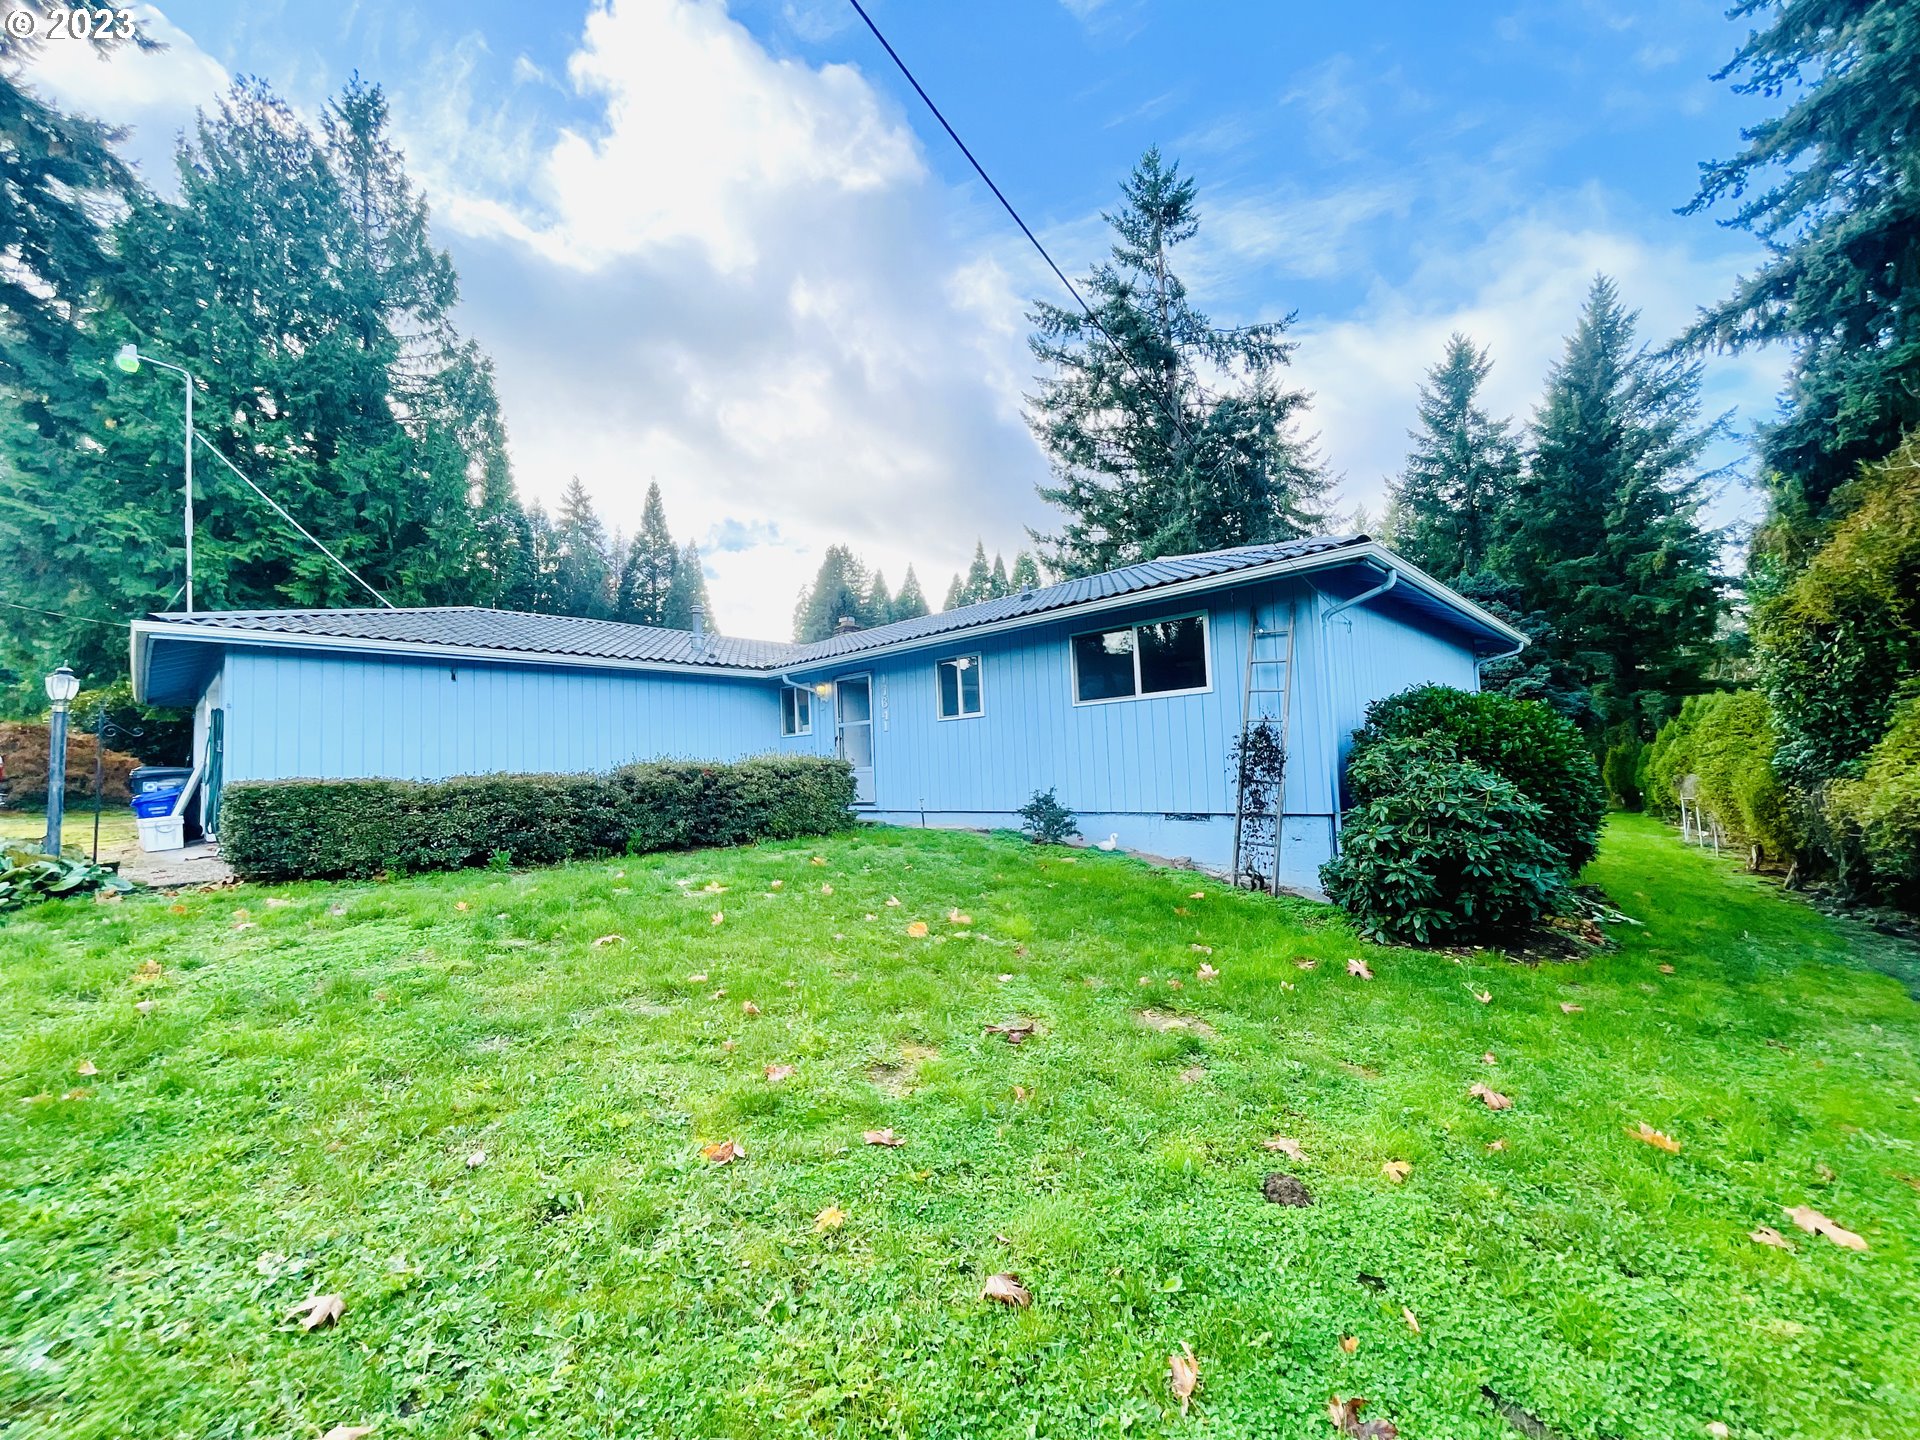 17641 S HOLLY LN, Oregon City, OR 